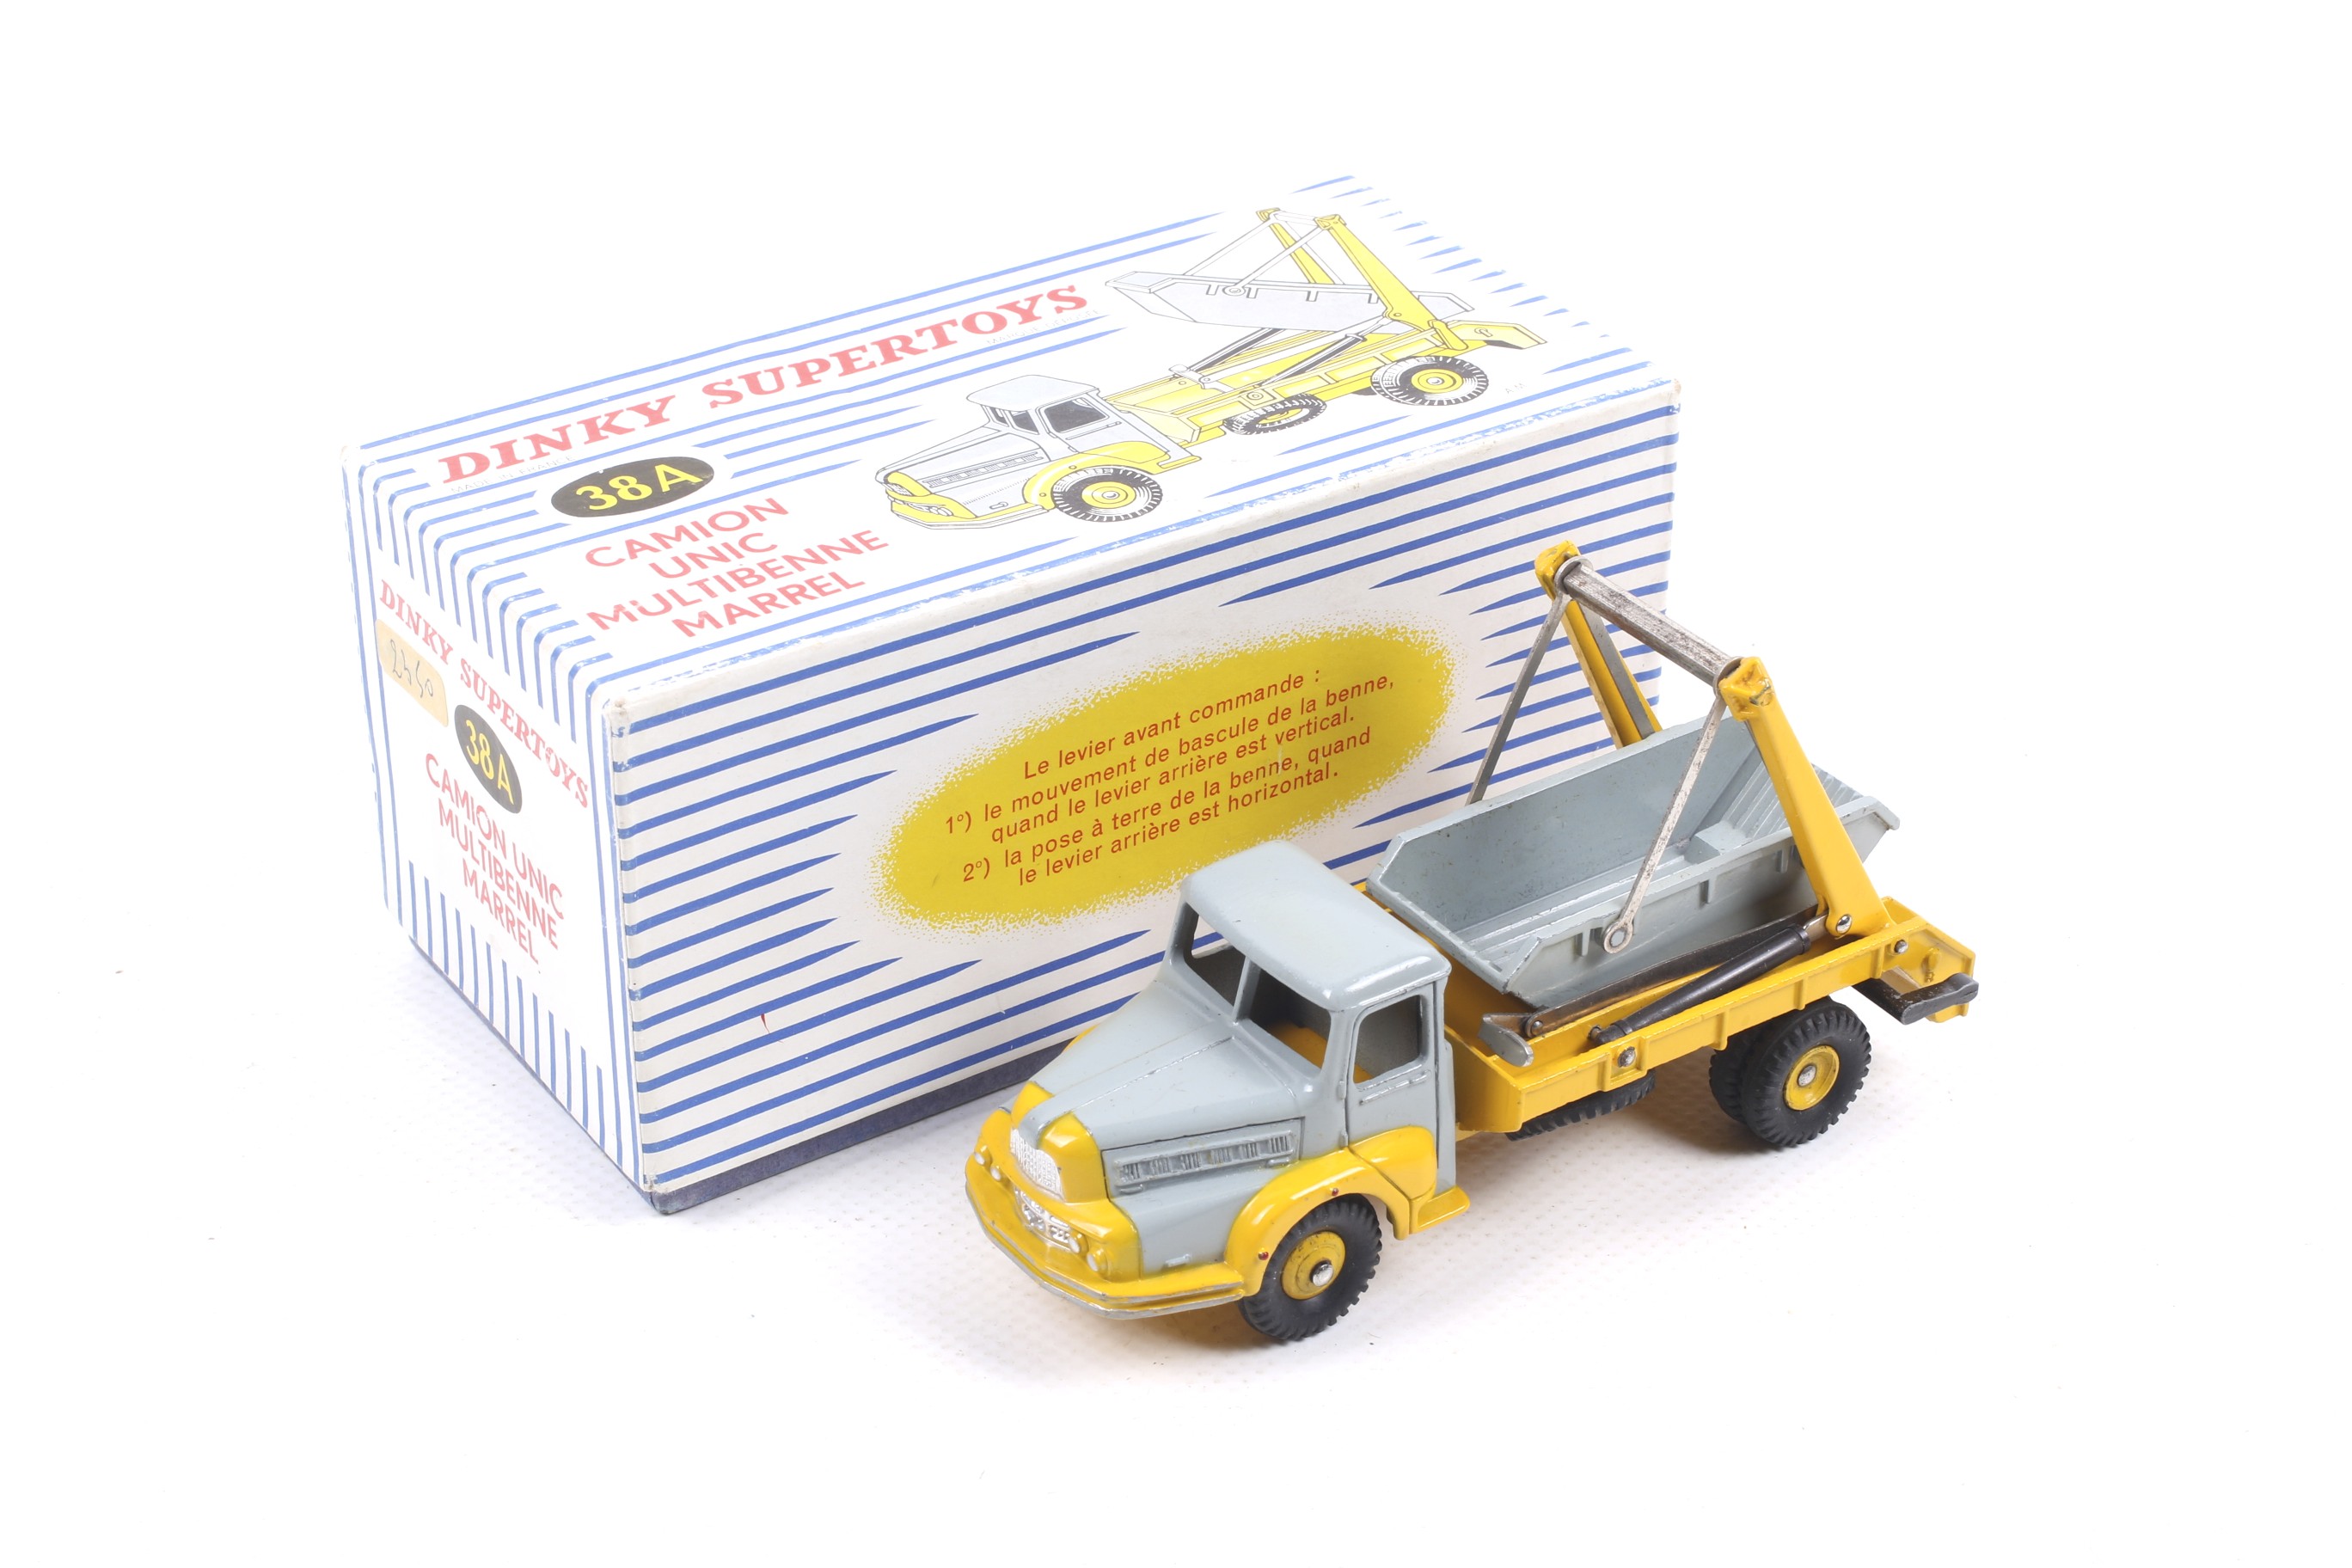 A French Dinky diecast Supertoys Multi bucket truck. No.